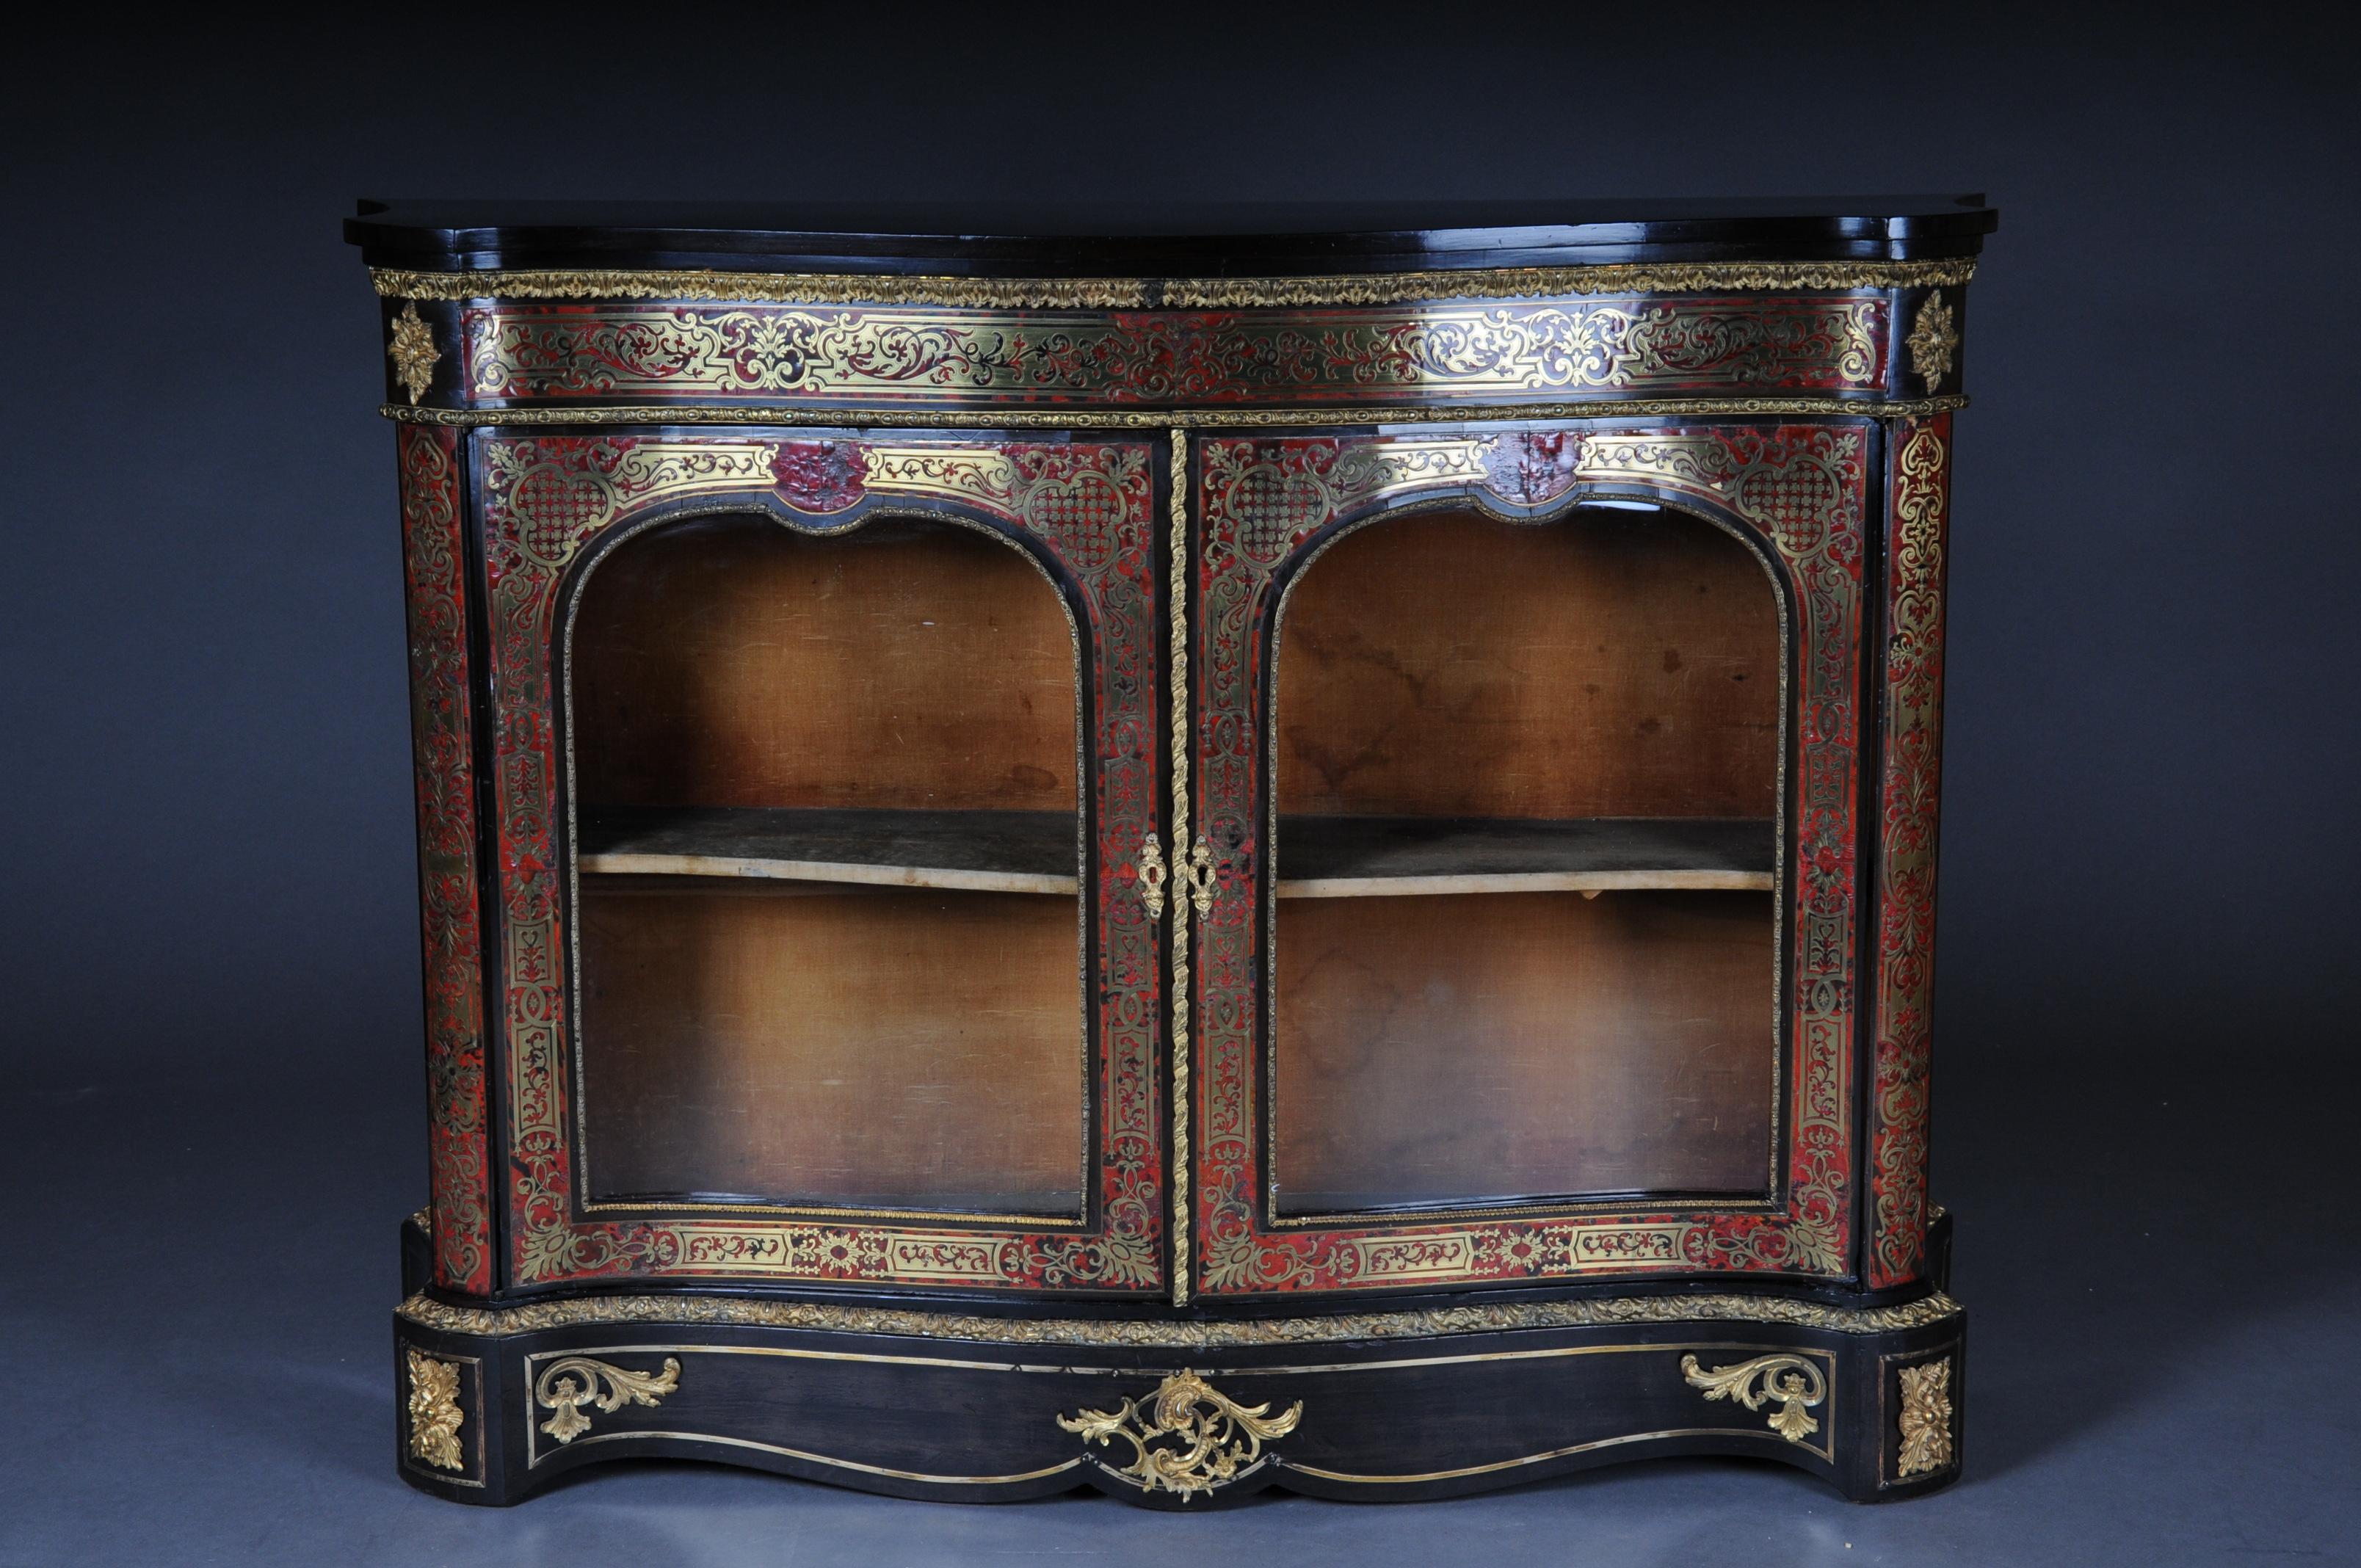 Salon Boulle chest of drawers Napoleon III Paris circa 1850-1880

Rectangular and curved body.
Meuble d'appui boulle / Chest of drawers Napoleon III Paris circa 1850-1880
The high-quality, chased fire-gilt bronze are distinctive and of